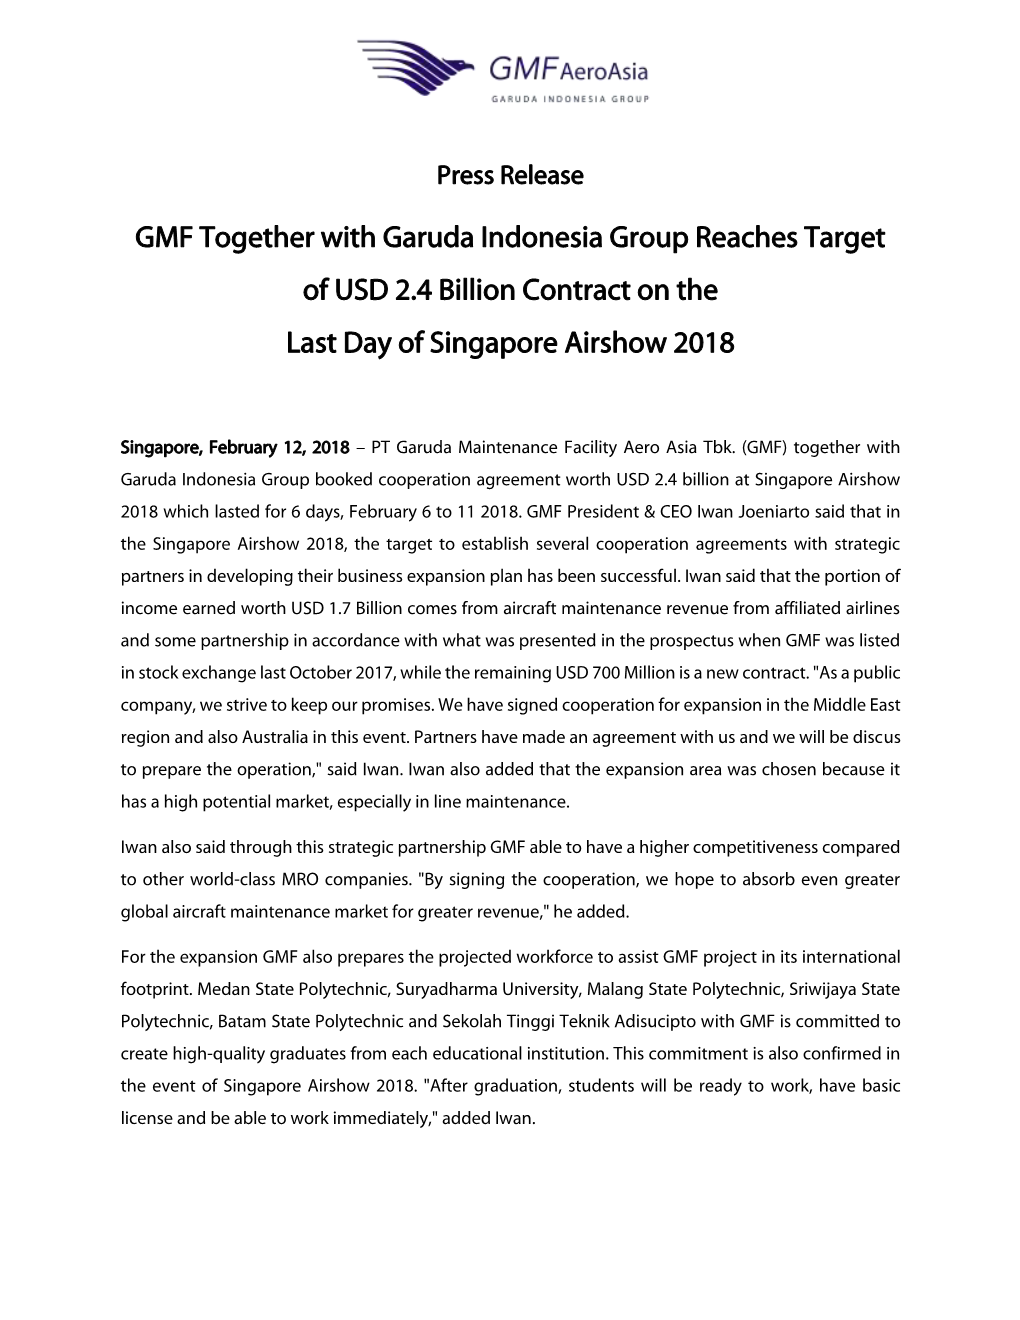 GMF Together with Garuda Indonesia Group Reaches Target of USD 2.4 Billion Contract on the Last Day of Singapore Airshow 2018